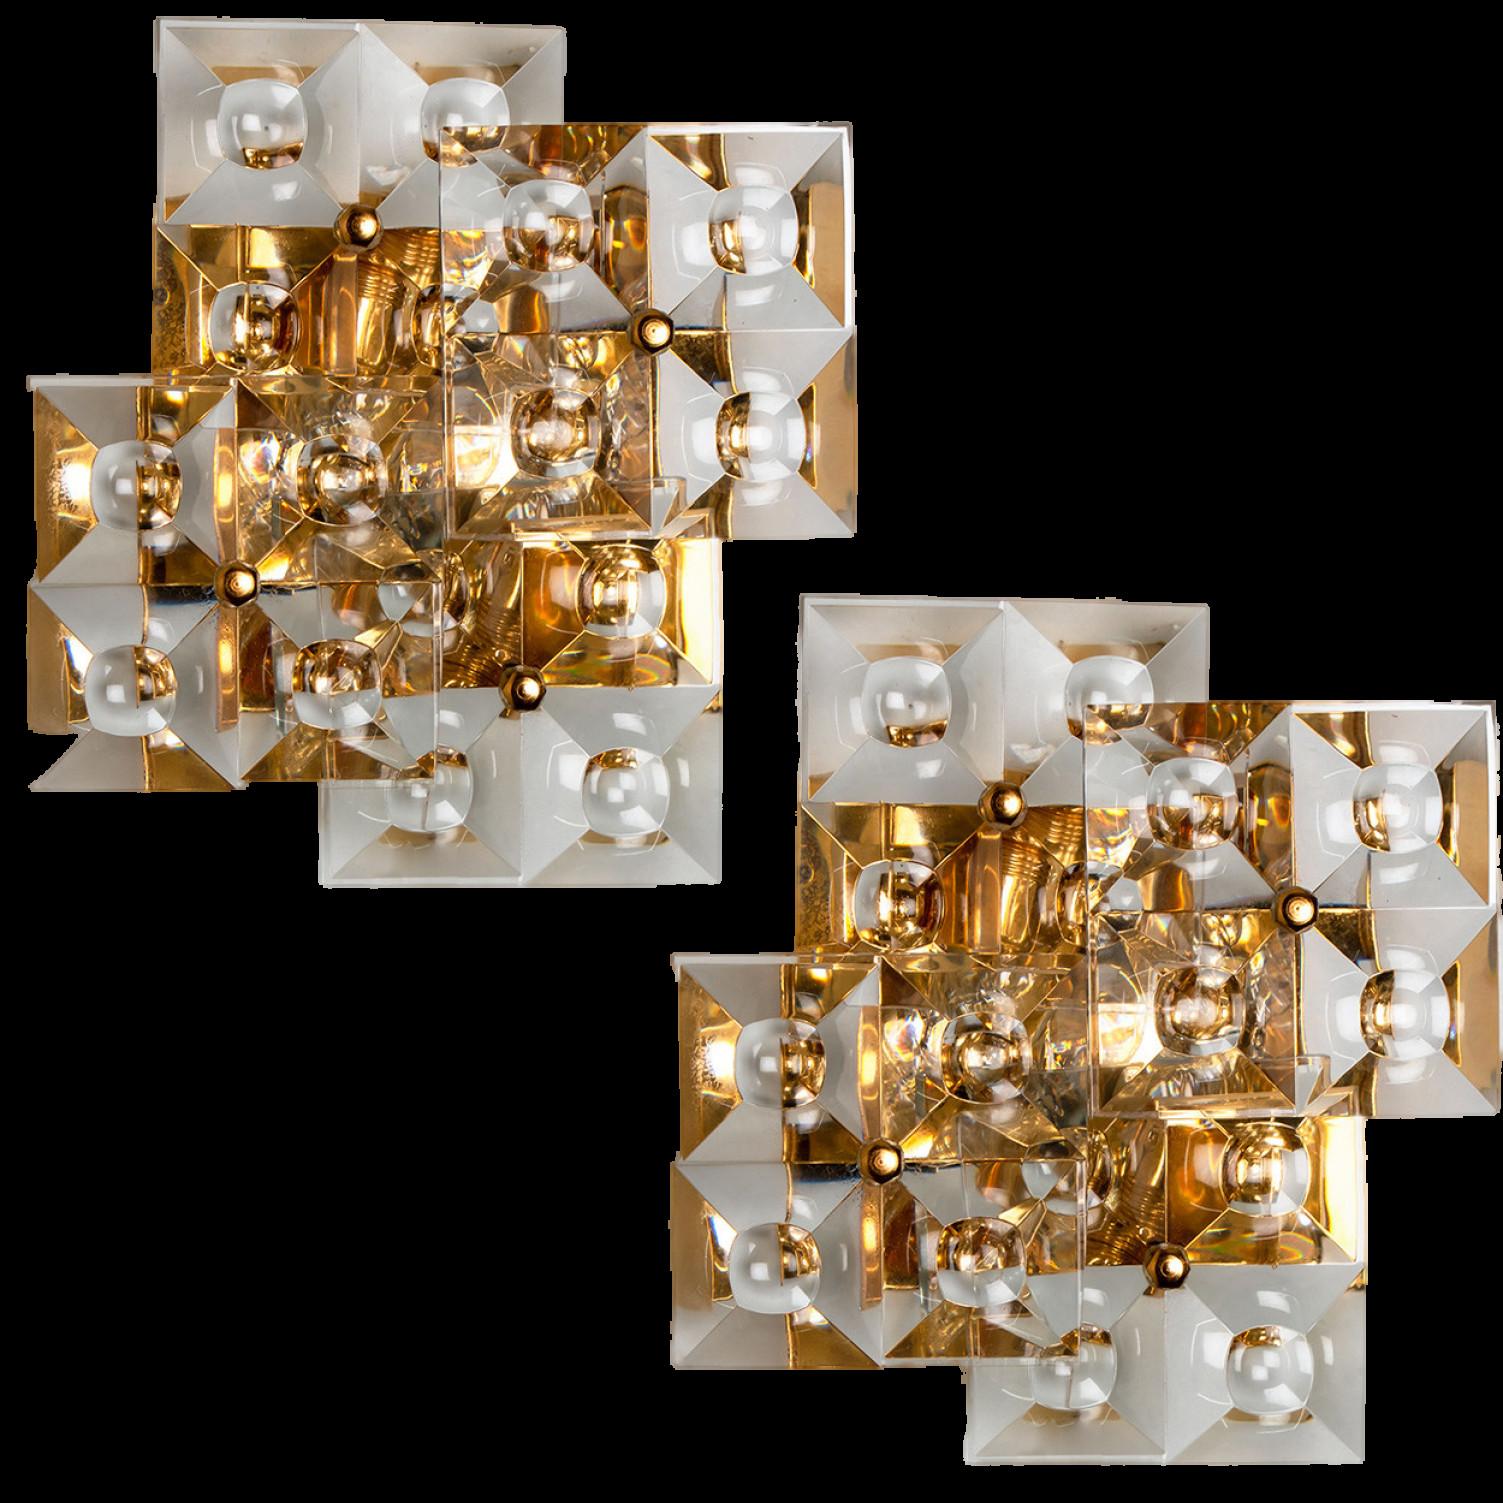 Pair of  golden sconces with crystal glasses, made by Kinkeldey, Germany, circa 1970-1979.
It’s composed of four square crystal glass pieces on a gilded brass frame. Best of the 1970s from Germany.
In excellent vintage